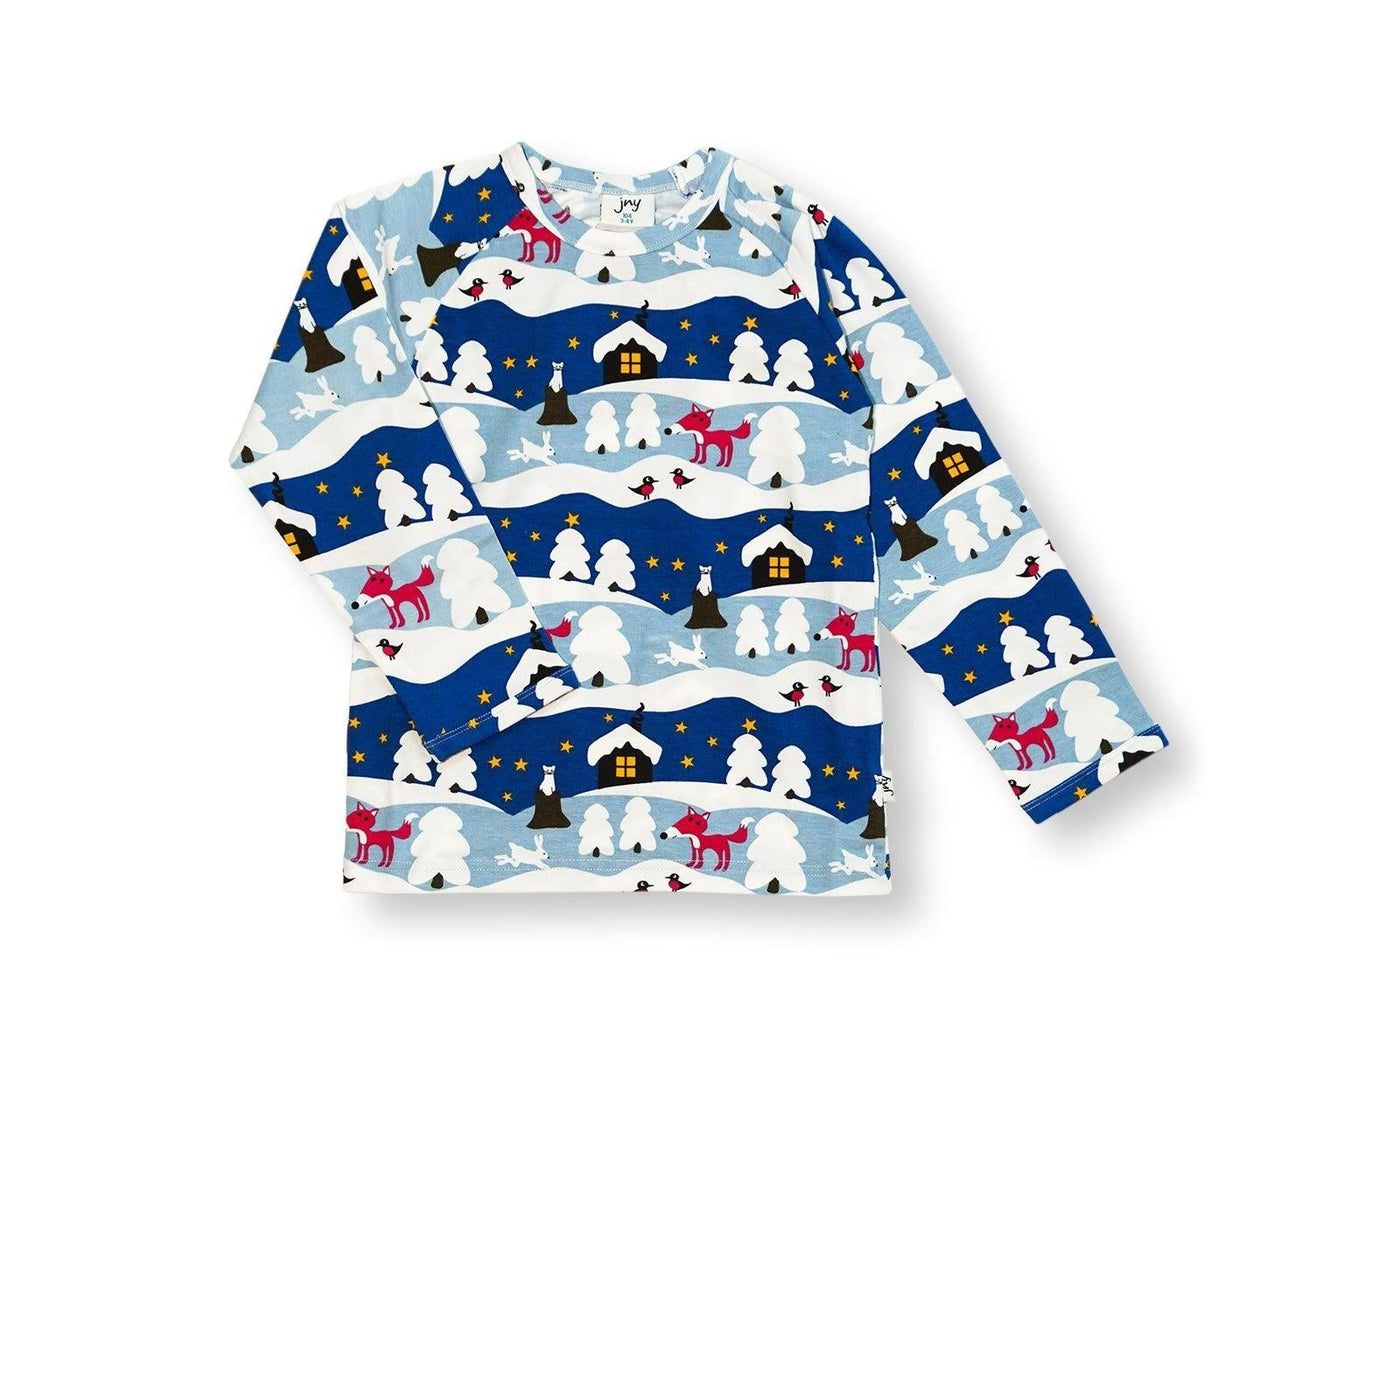 JNY Snow Cottage Long-sleeve Shirt - 6-9 months